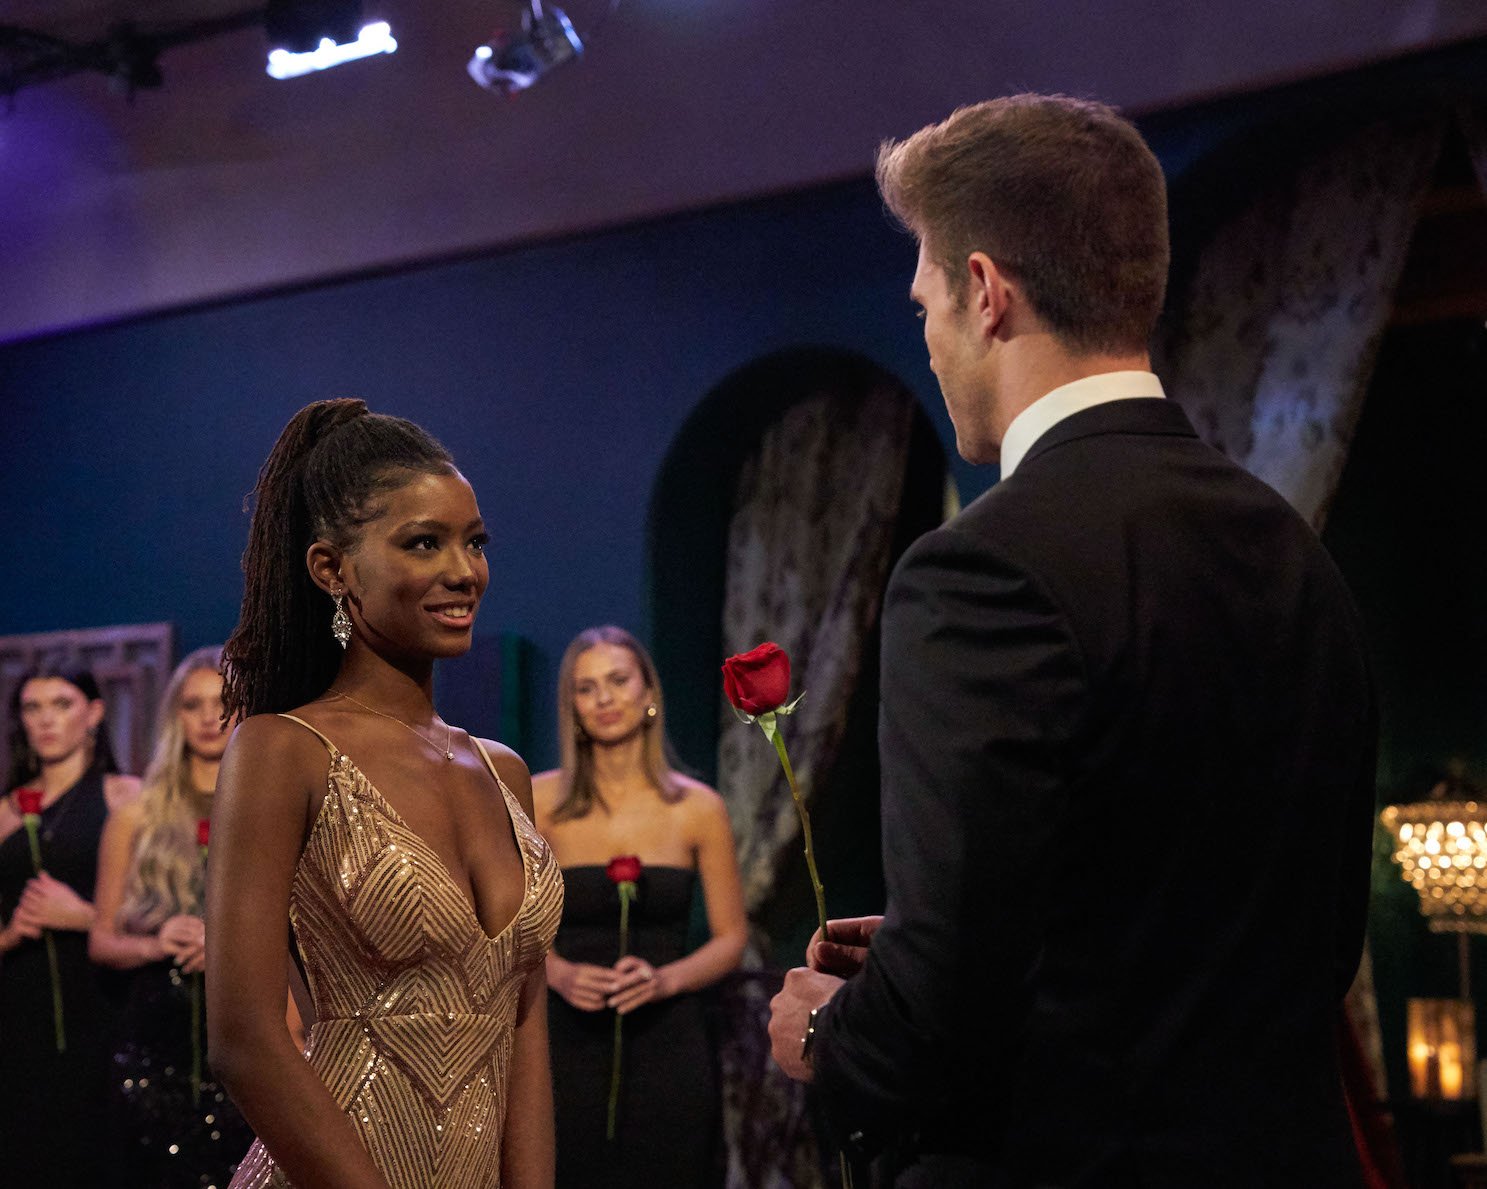 Brianna Thorbourne and Zach Shallcross at a rose ceremony in 'The Bachelor' Season 27